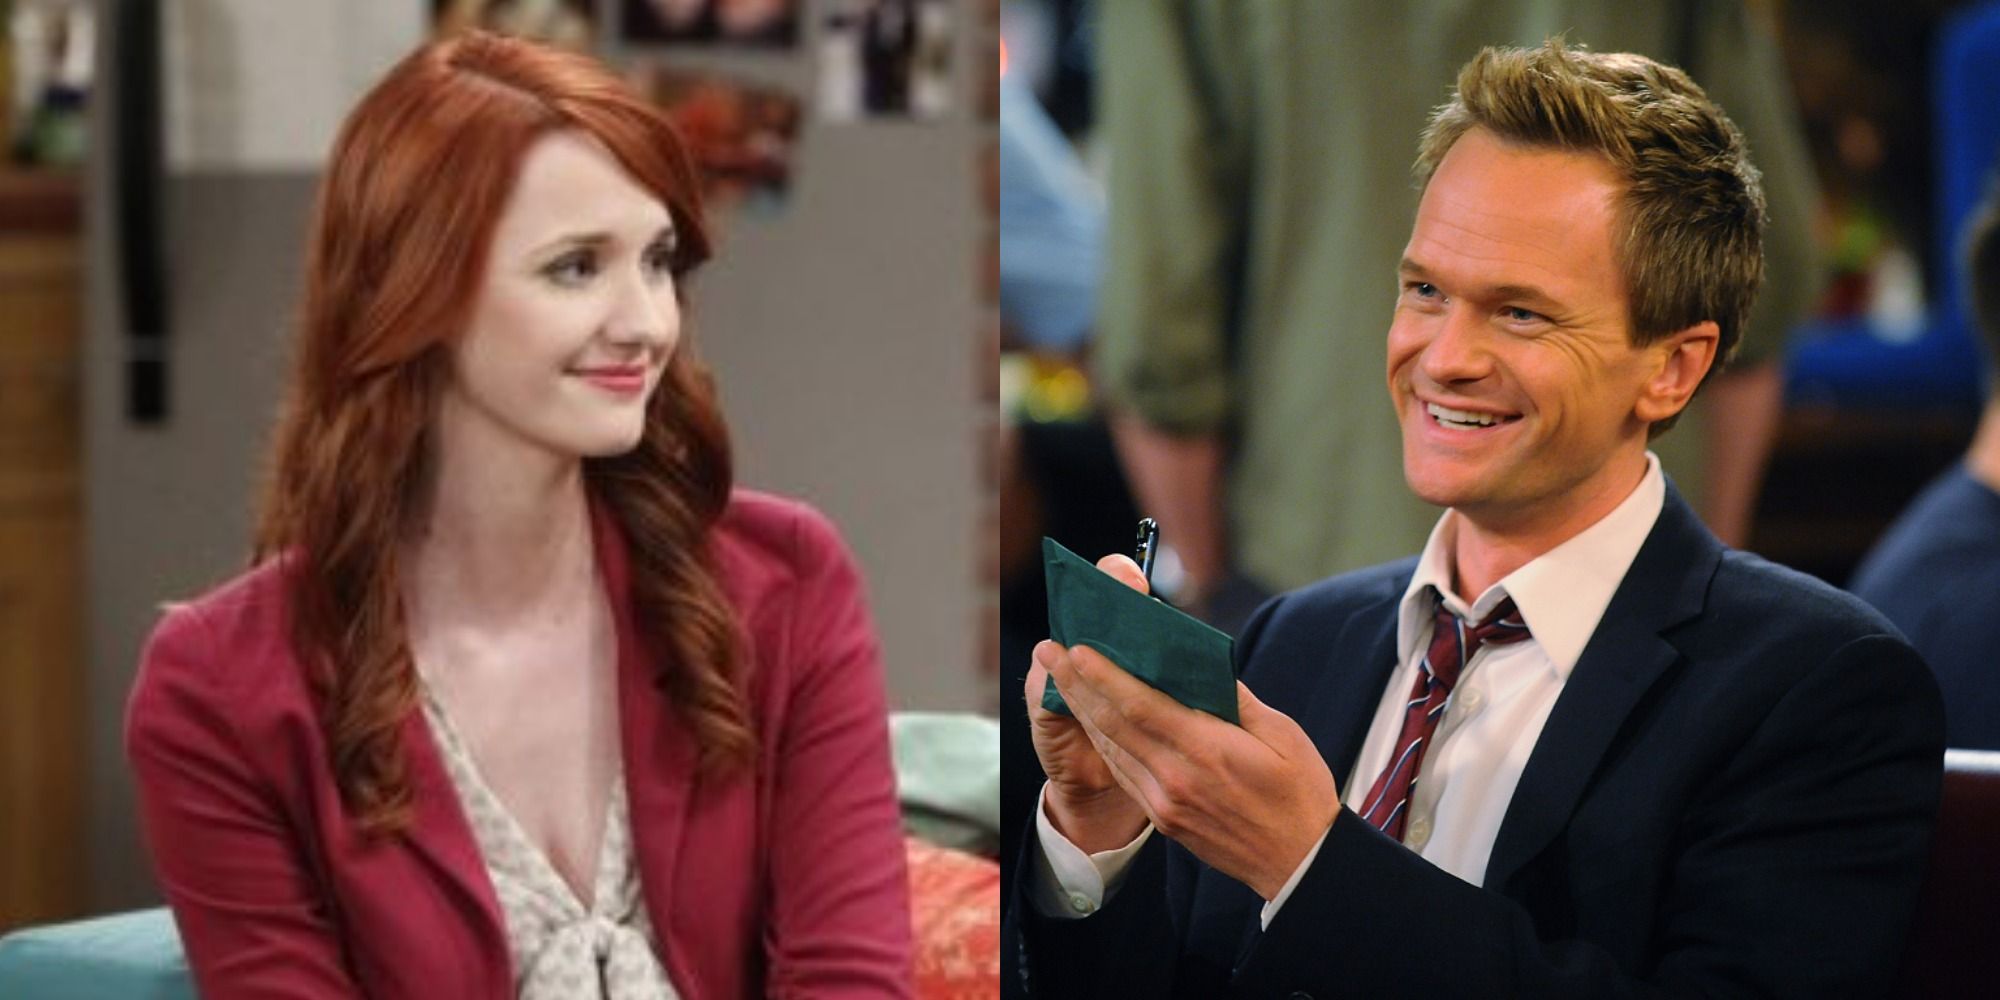 A split-screen image showing The Big Bang Theory's Emily Sweeney and How I Met Your Mother's Barney Stinson